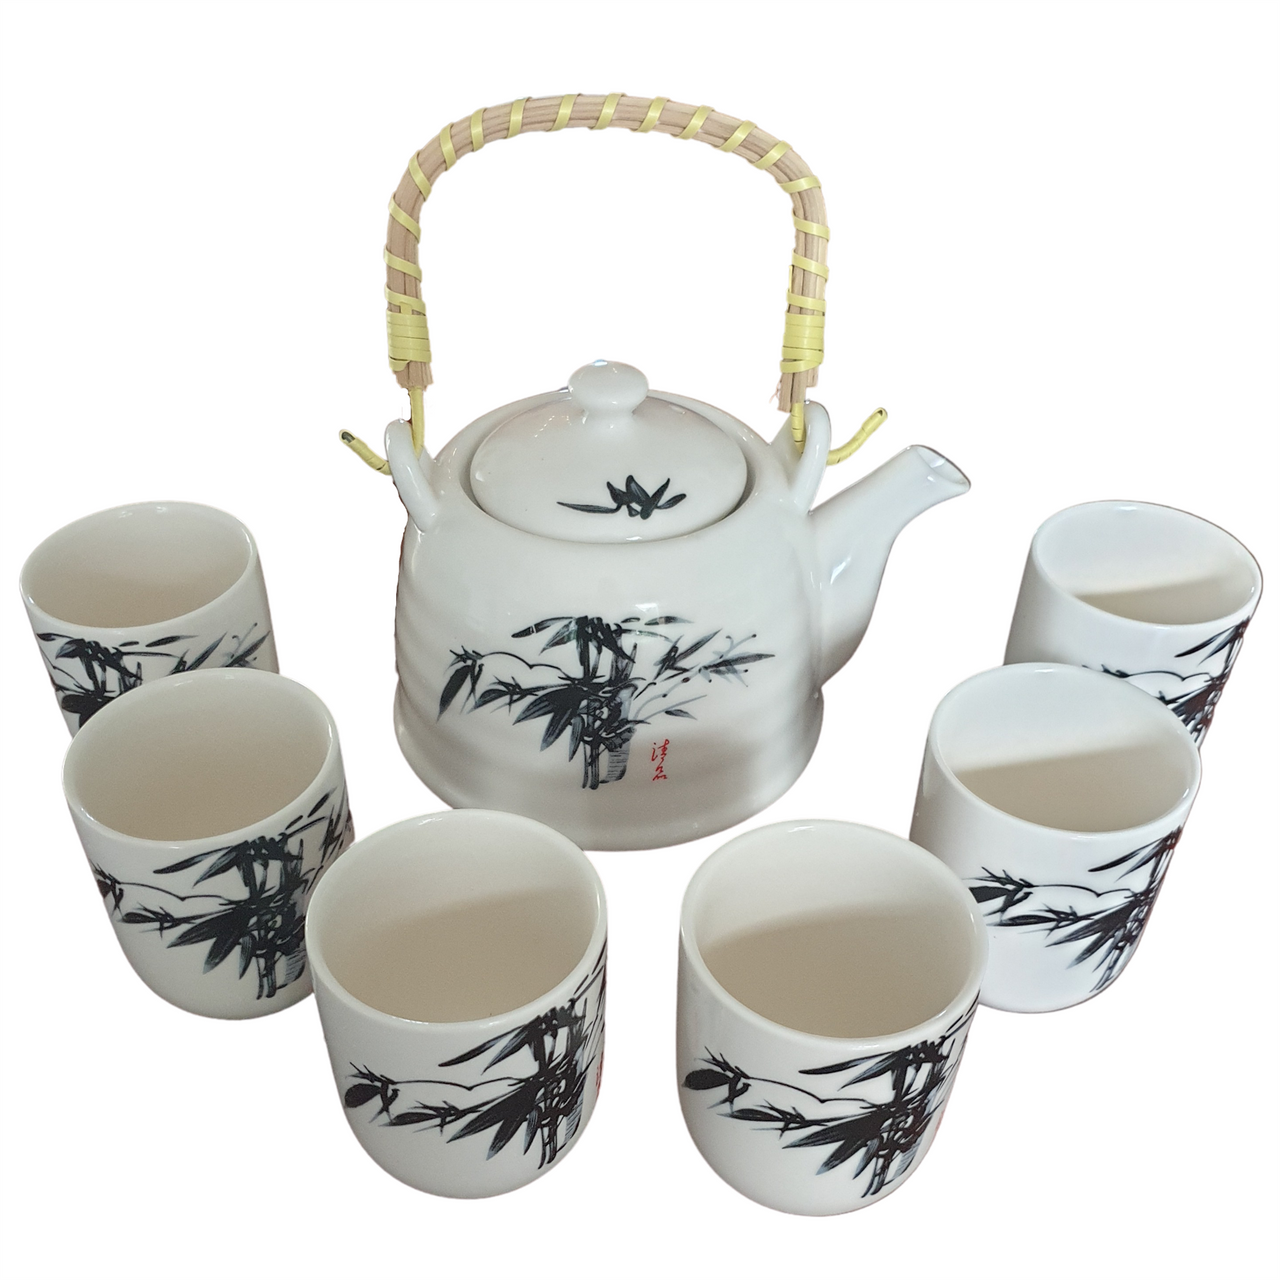 Chinese Ceramic Tea Set - Oriental Pattern - 6 Cups and Infuser - Boxed